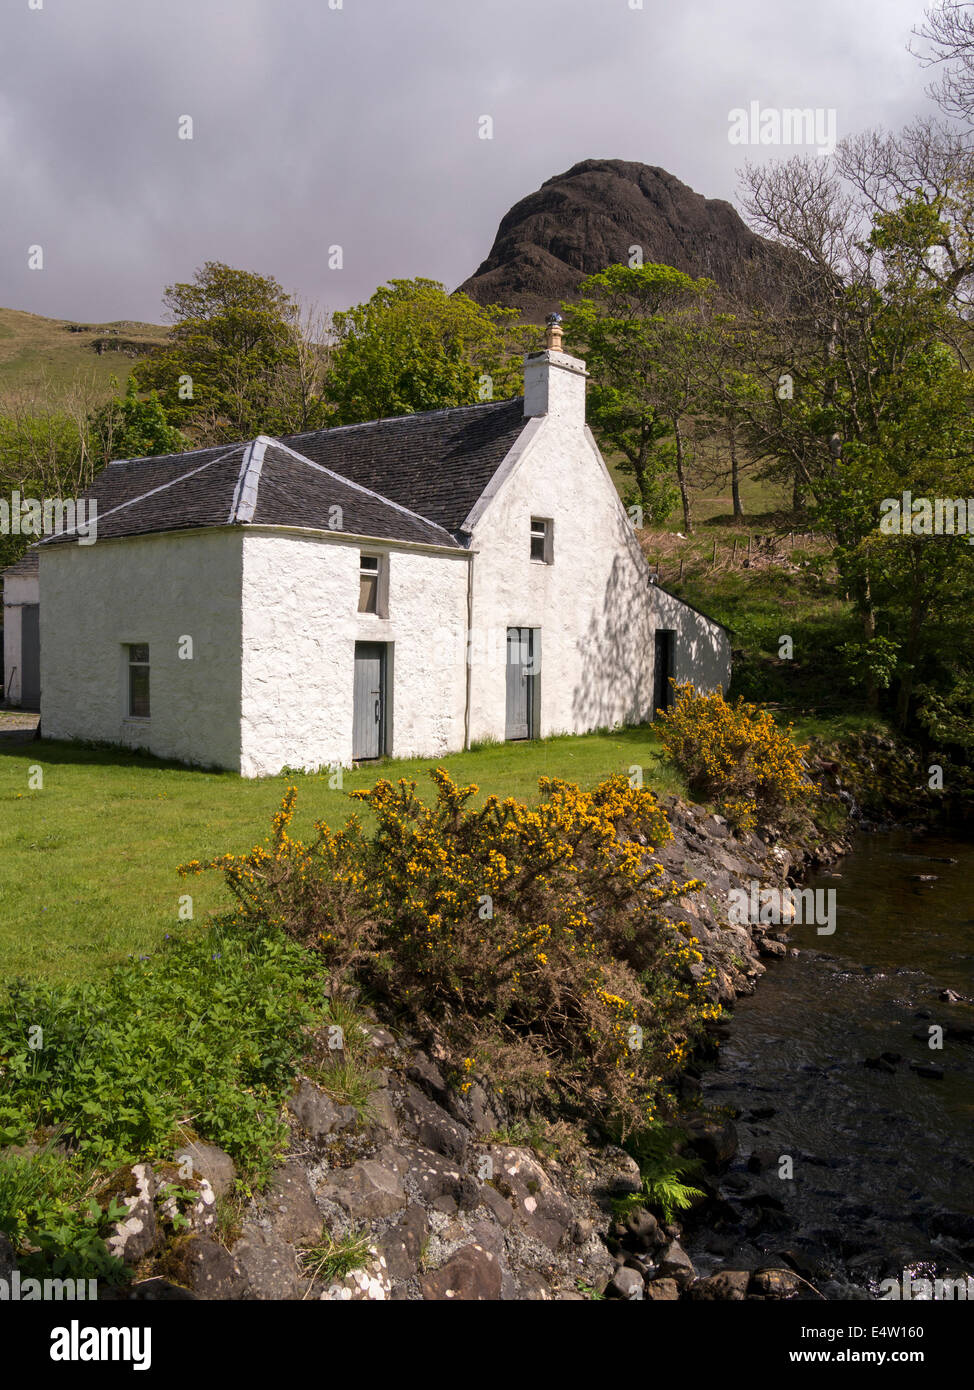 Sunlit white farm buildings at Talisker House in front of Pershal More mountain, Talisker, Isle of Skye, Scotland, UK Stock Photo